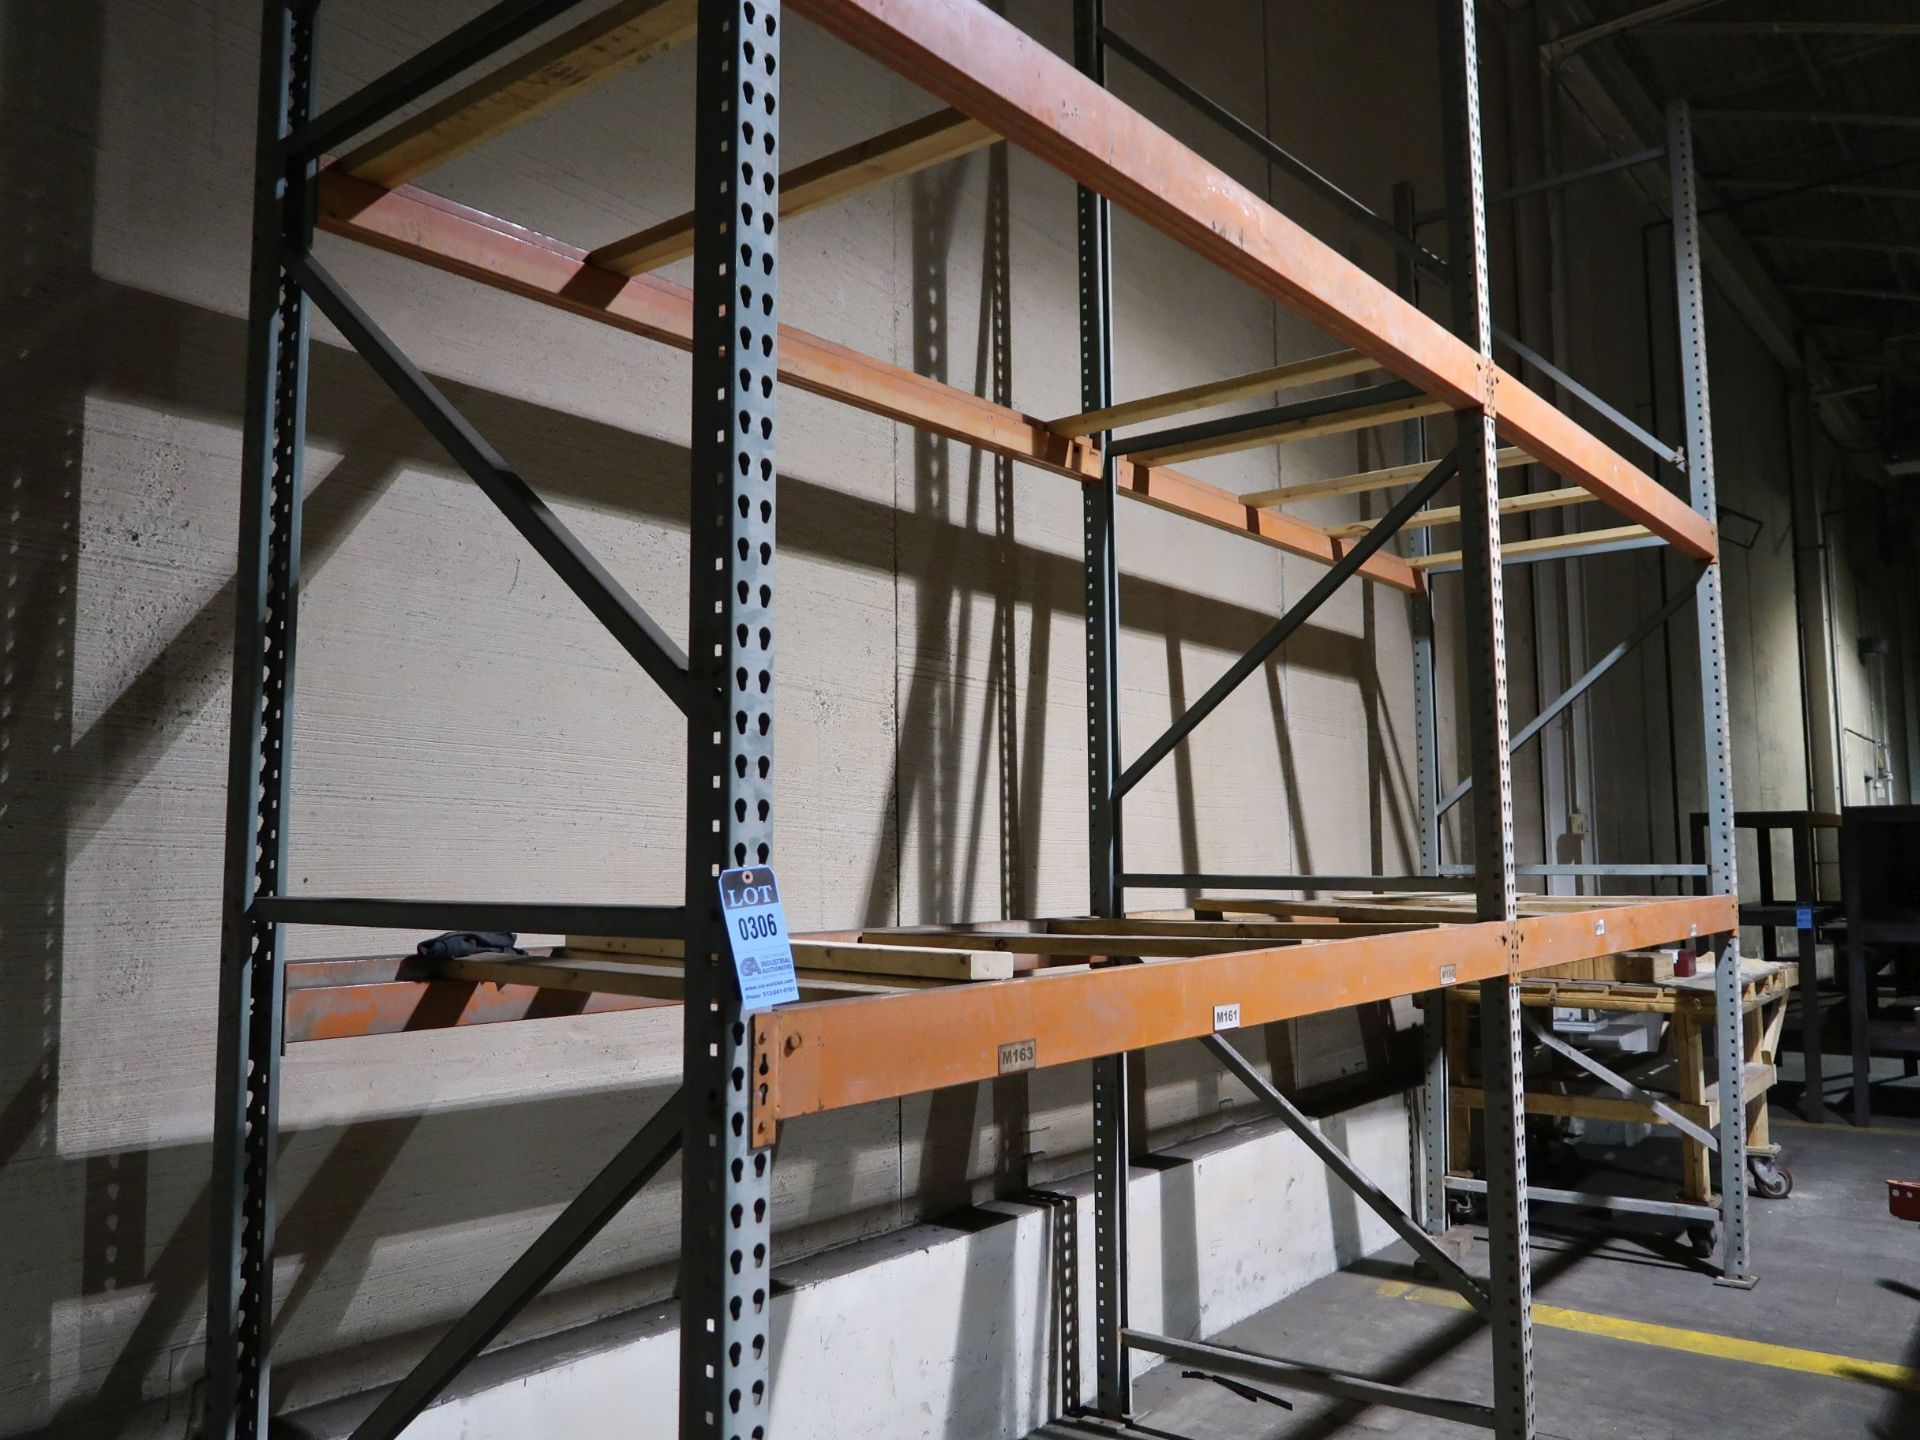 SECTIONS 48" X 96" X 15' HIGH ADJUSTABLE BEAM TEAR DROP STYLE PALLET RACK - Image 2 of 2